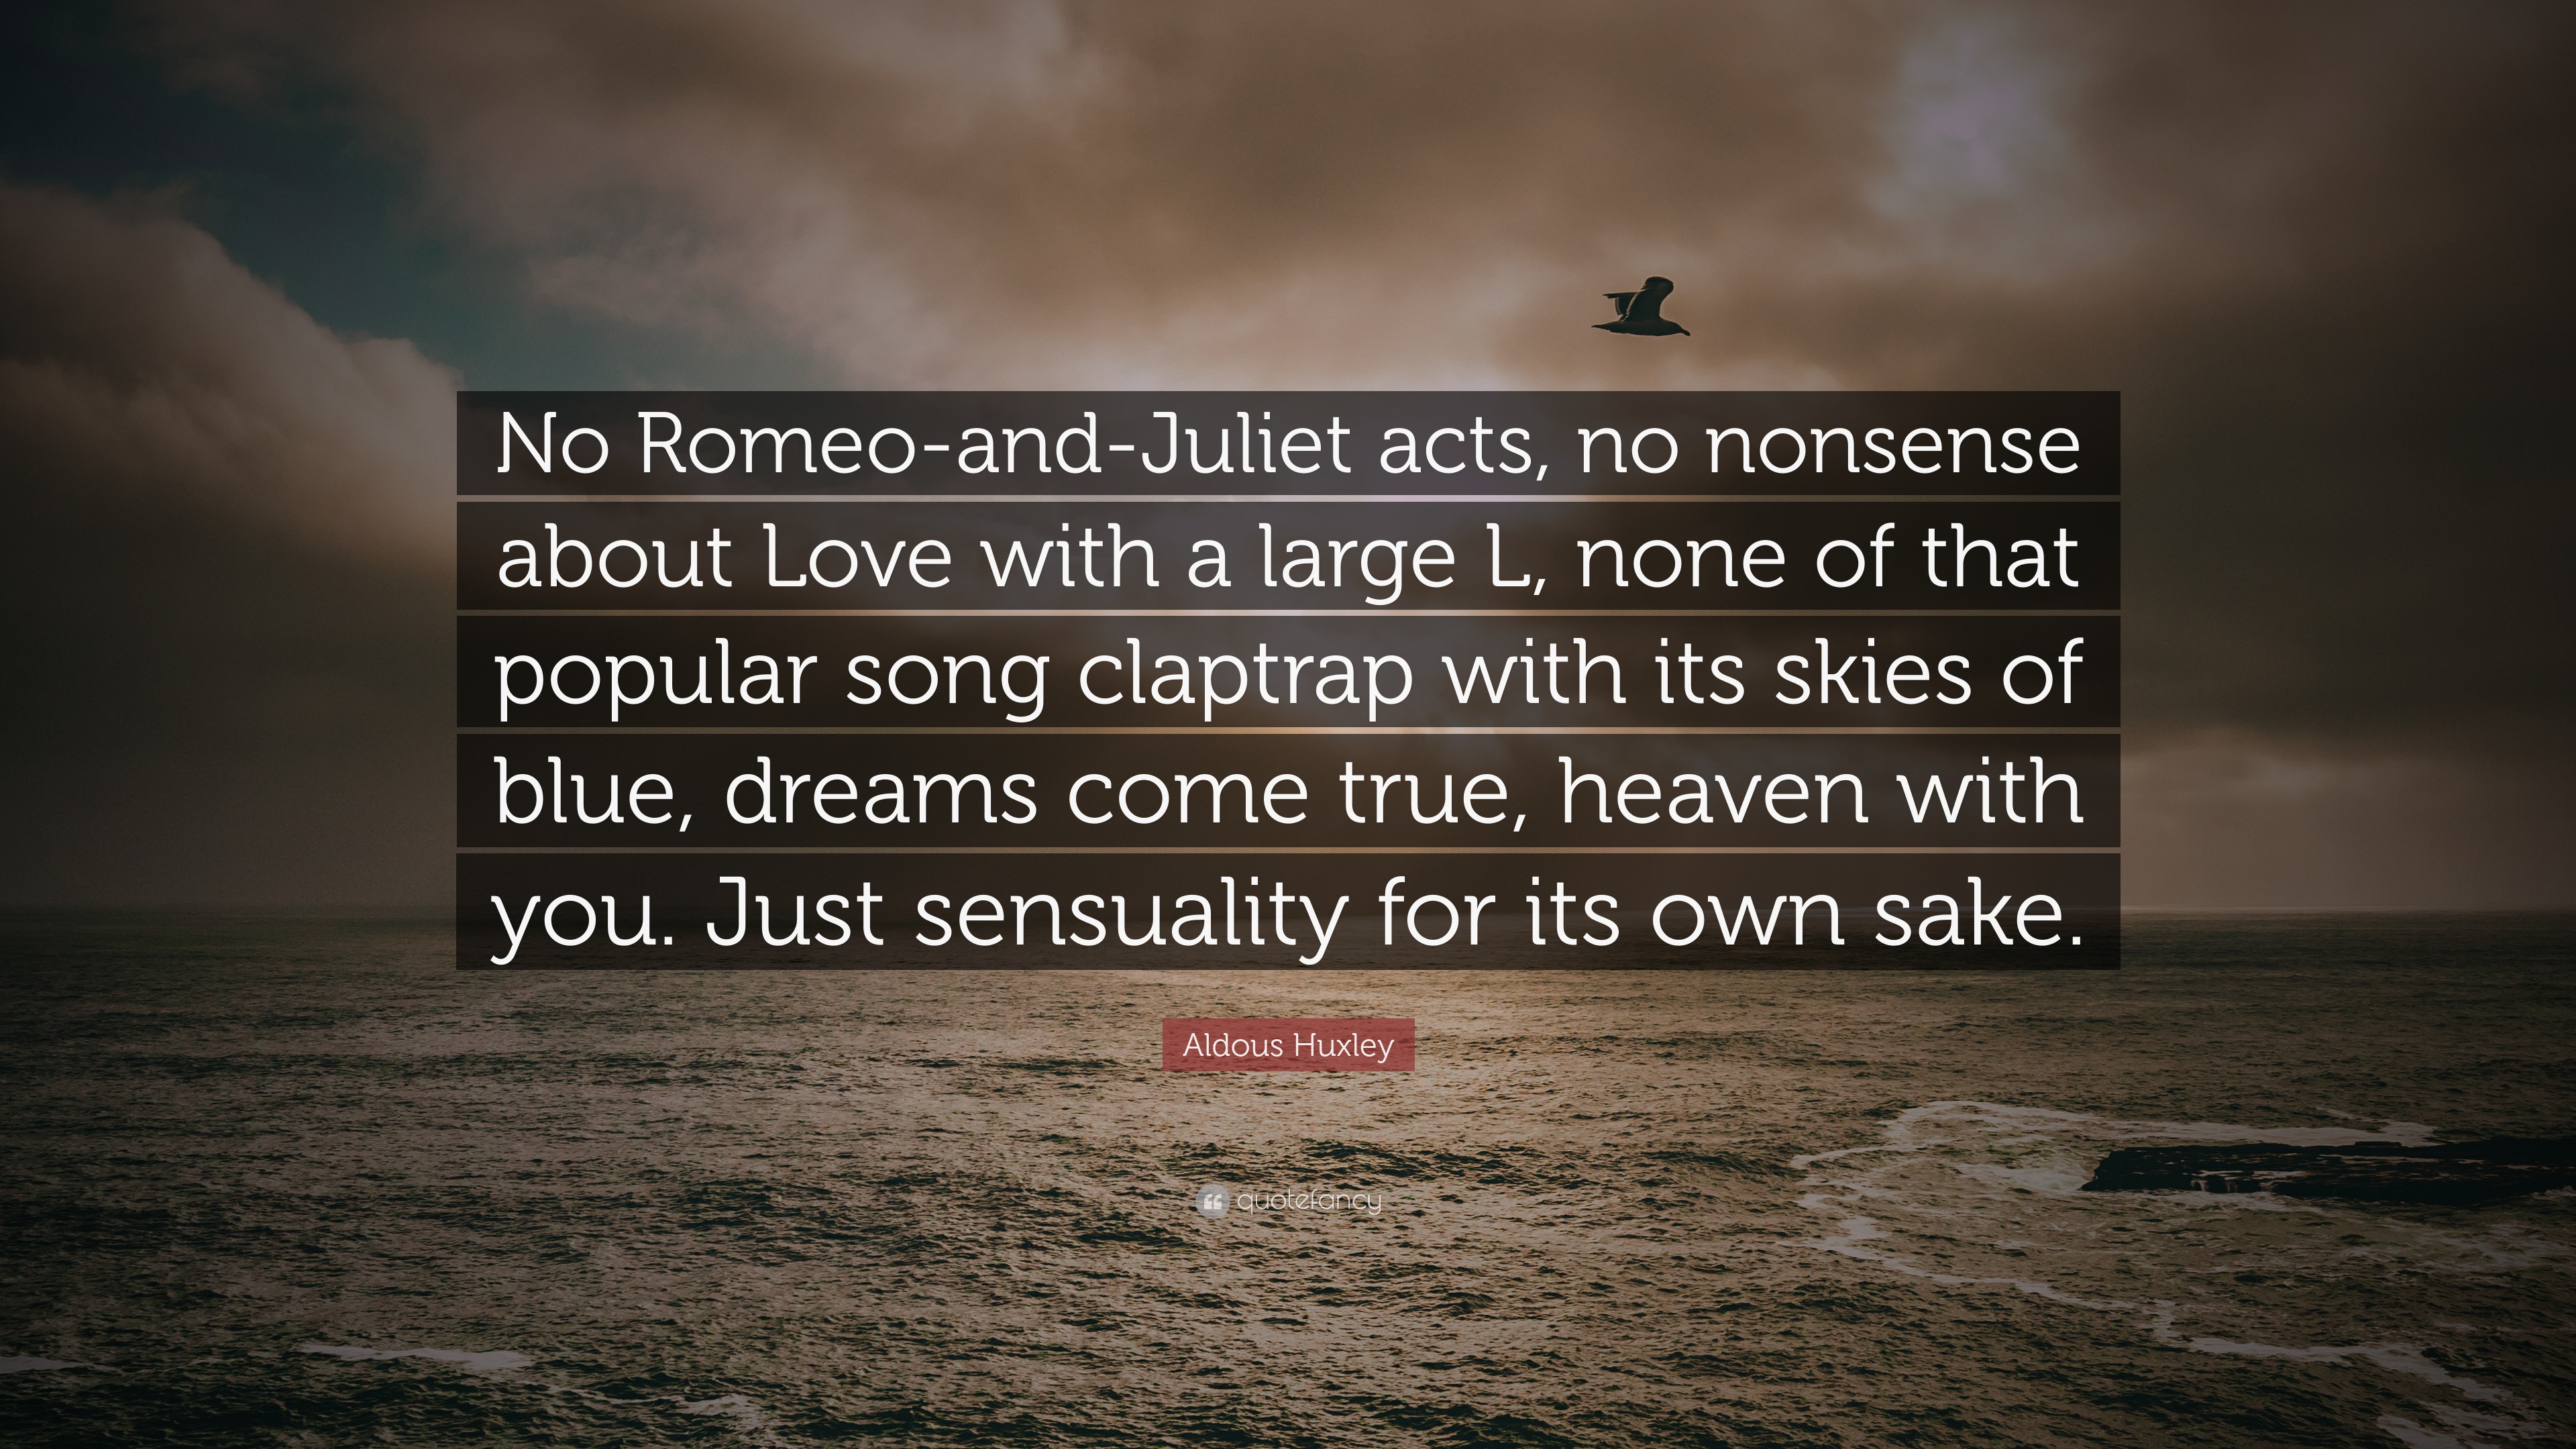 Aldous Huxley Quote “No Romeo and Juliet acts no nonsense about